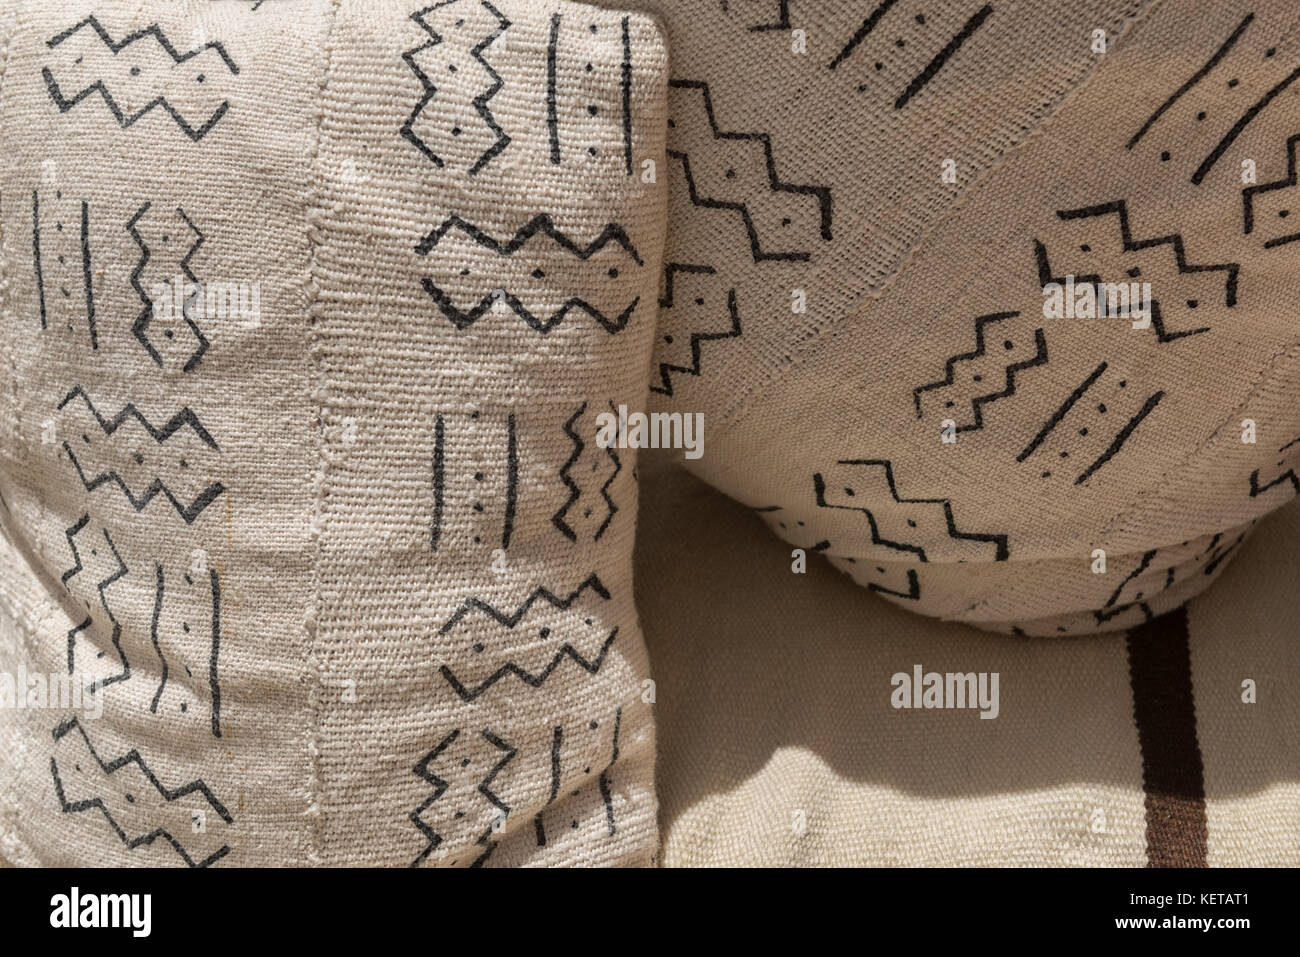 Moroccan cushions with traditional Berber design. Stock Photo